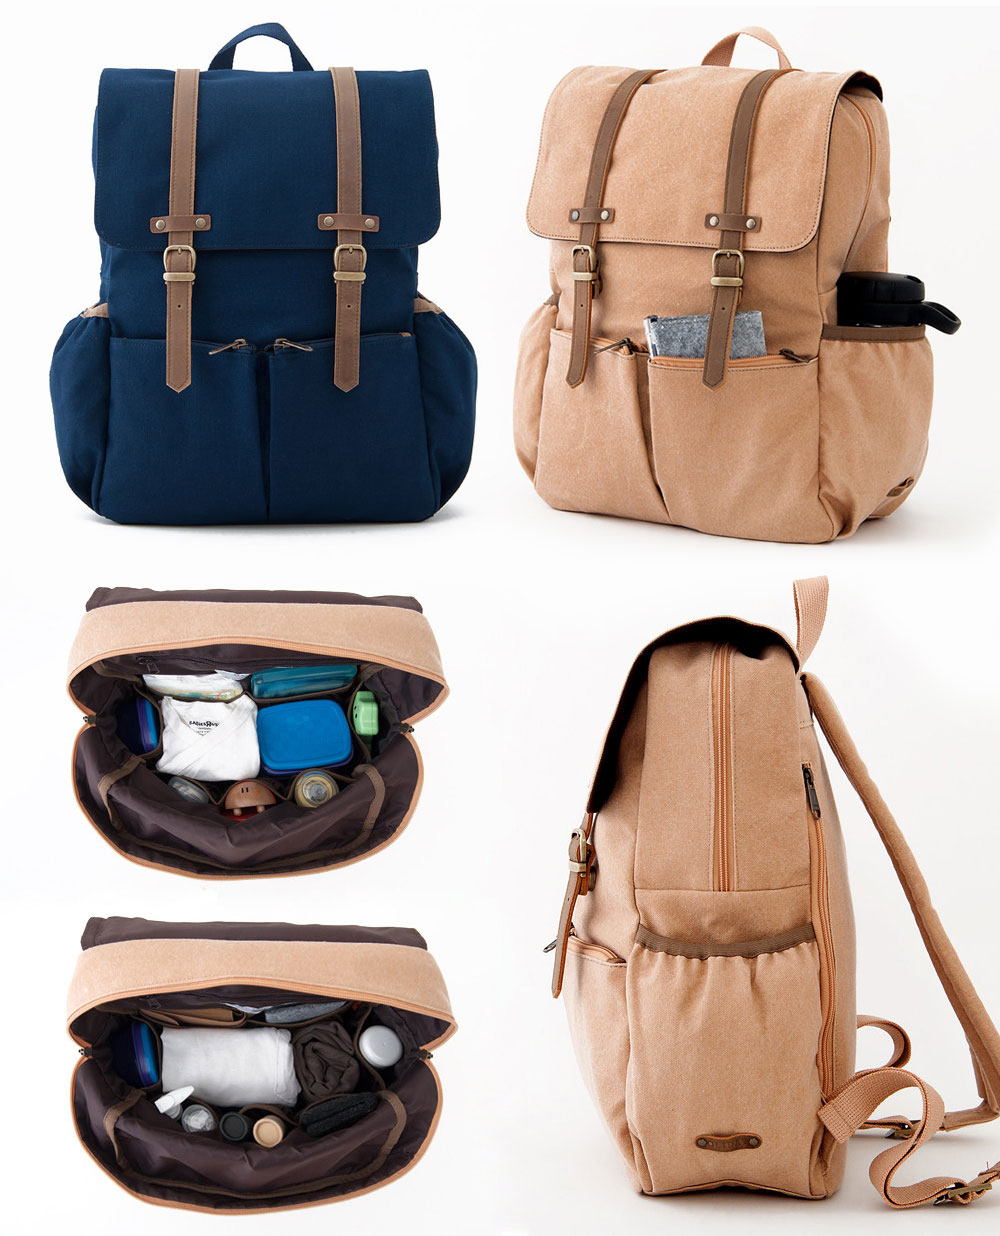 15 Best Diaper Bags and Backpacks For Every Parent in 2023 | POPSUGAR Family